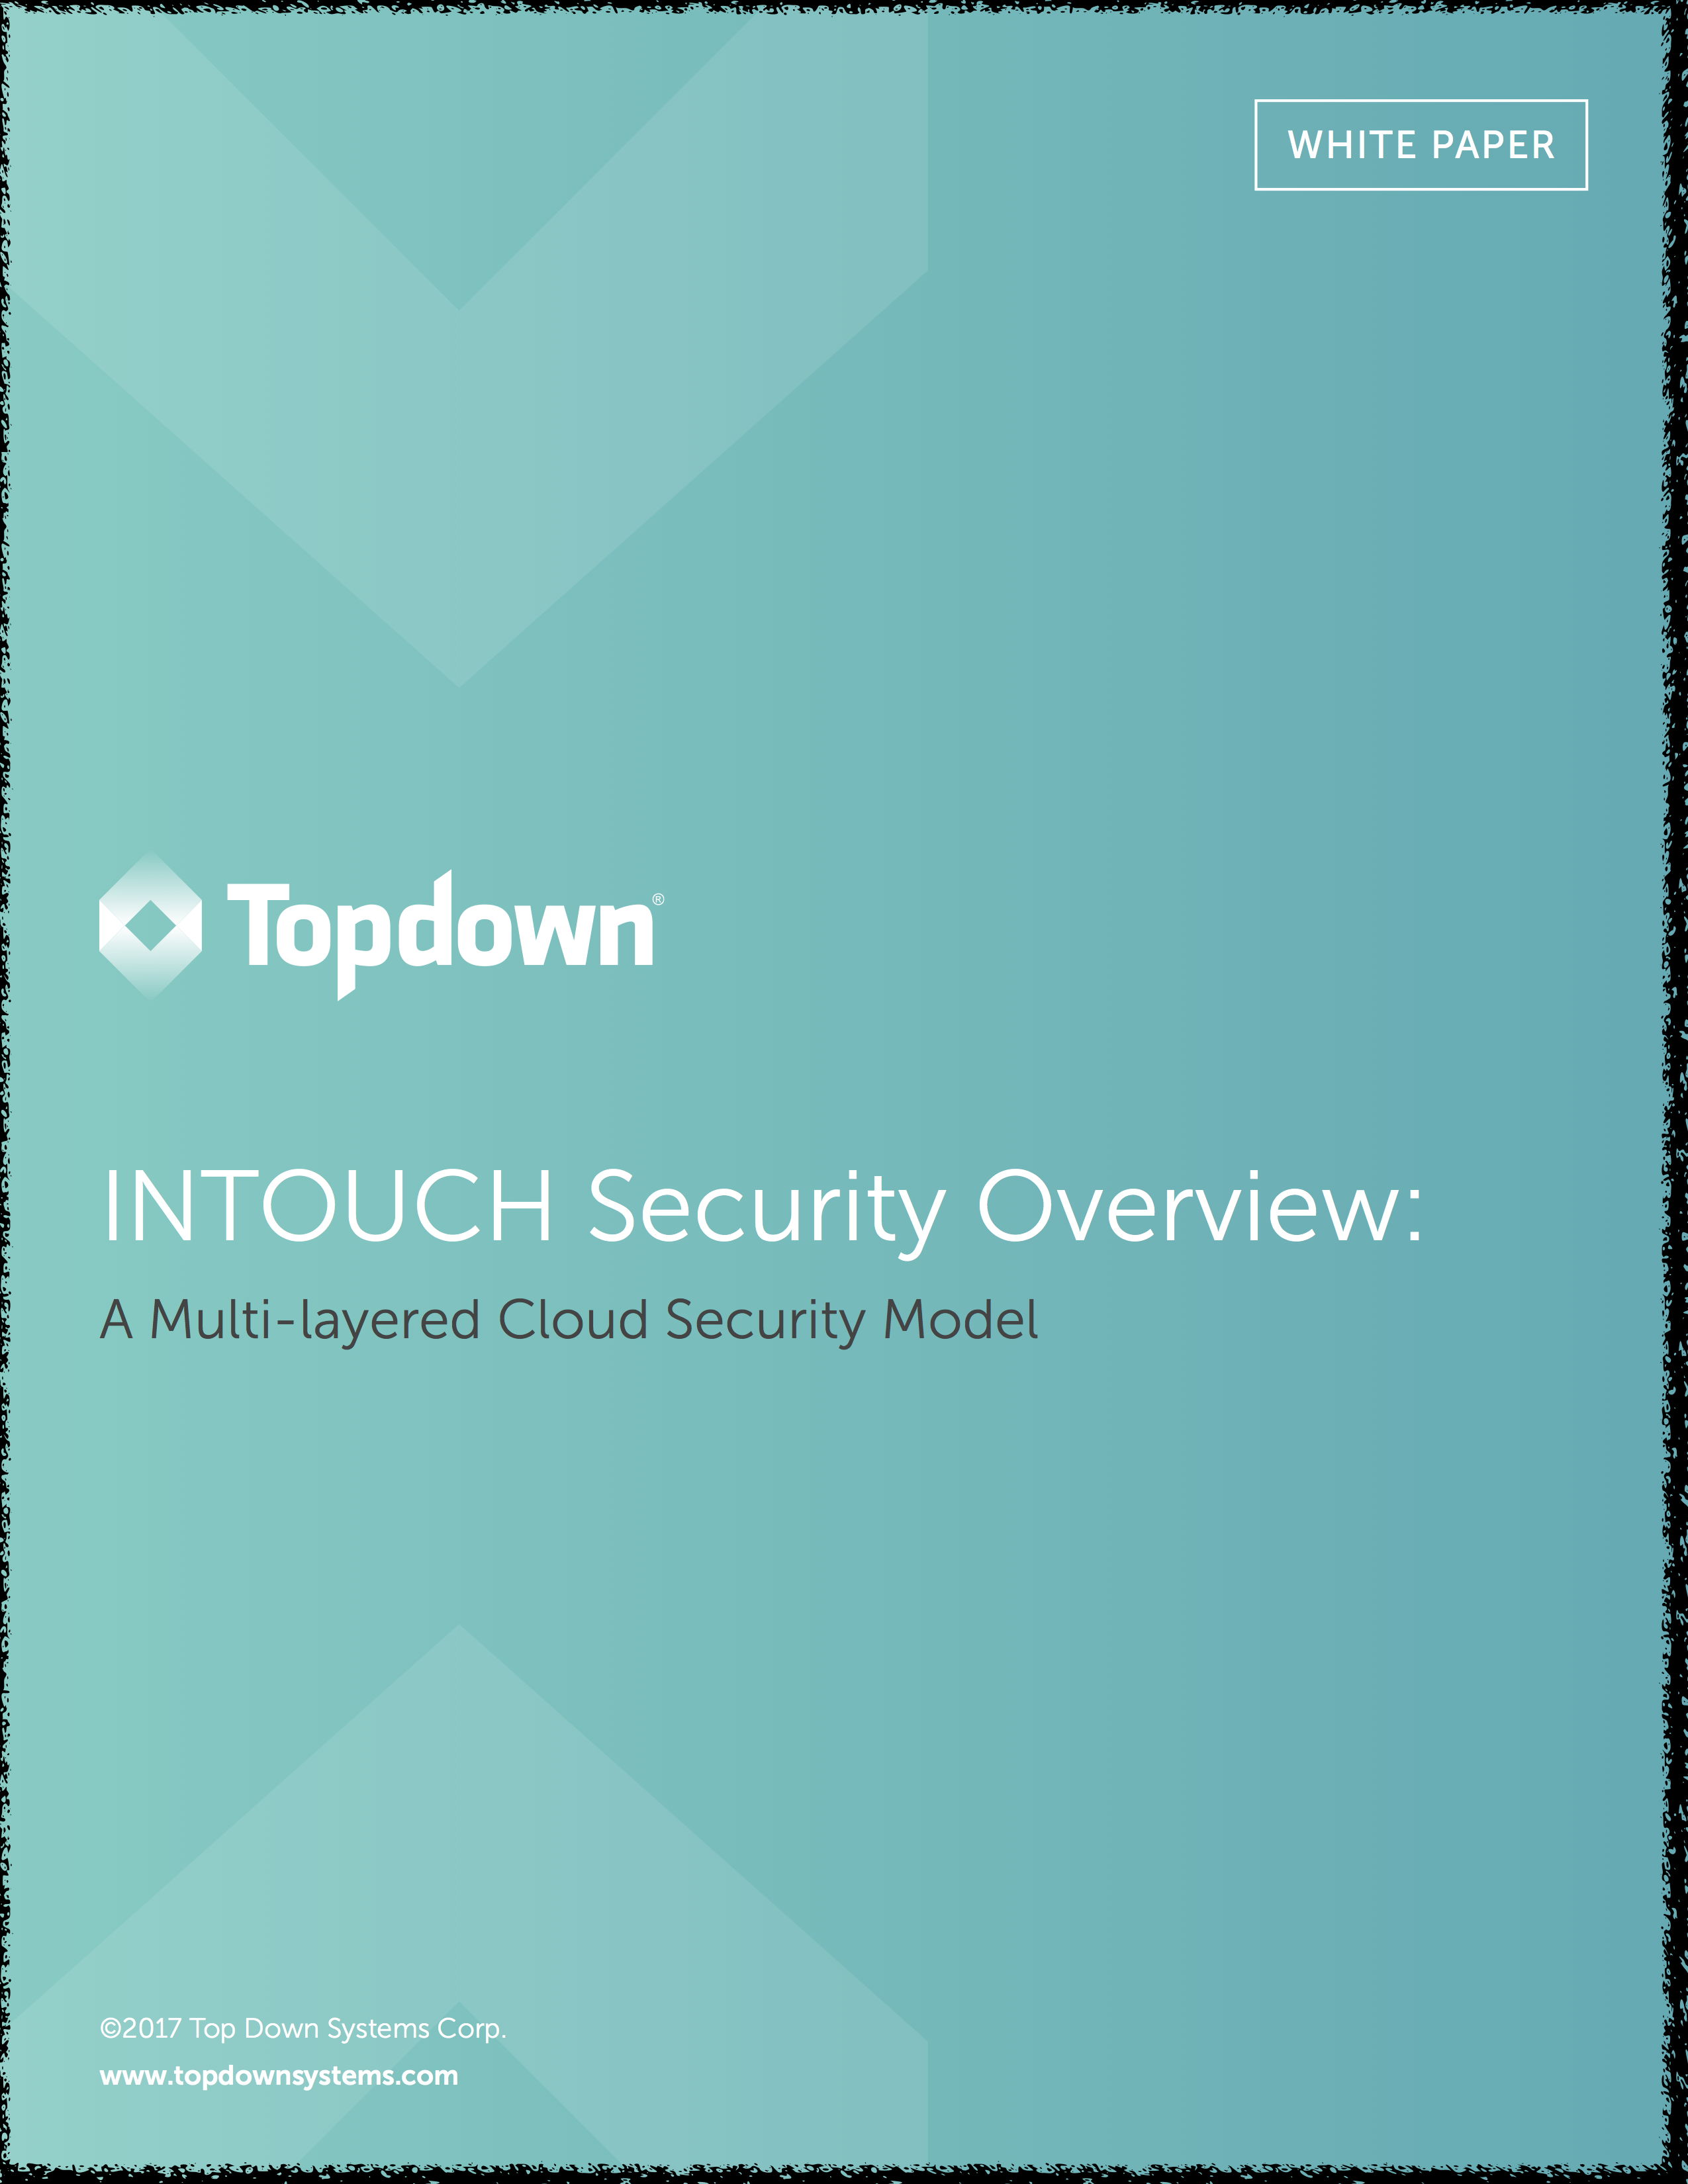 PDF on Topdown INTOUCH Security